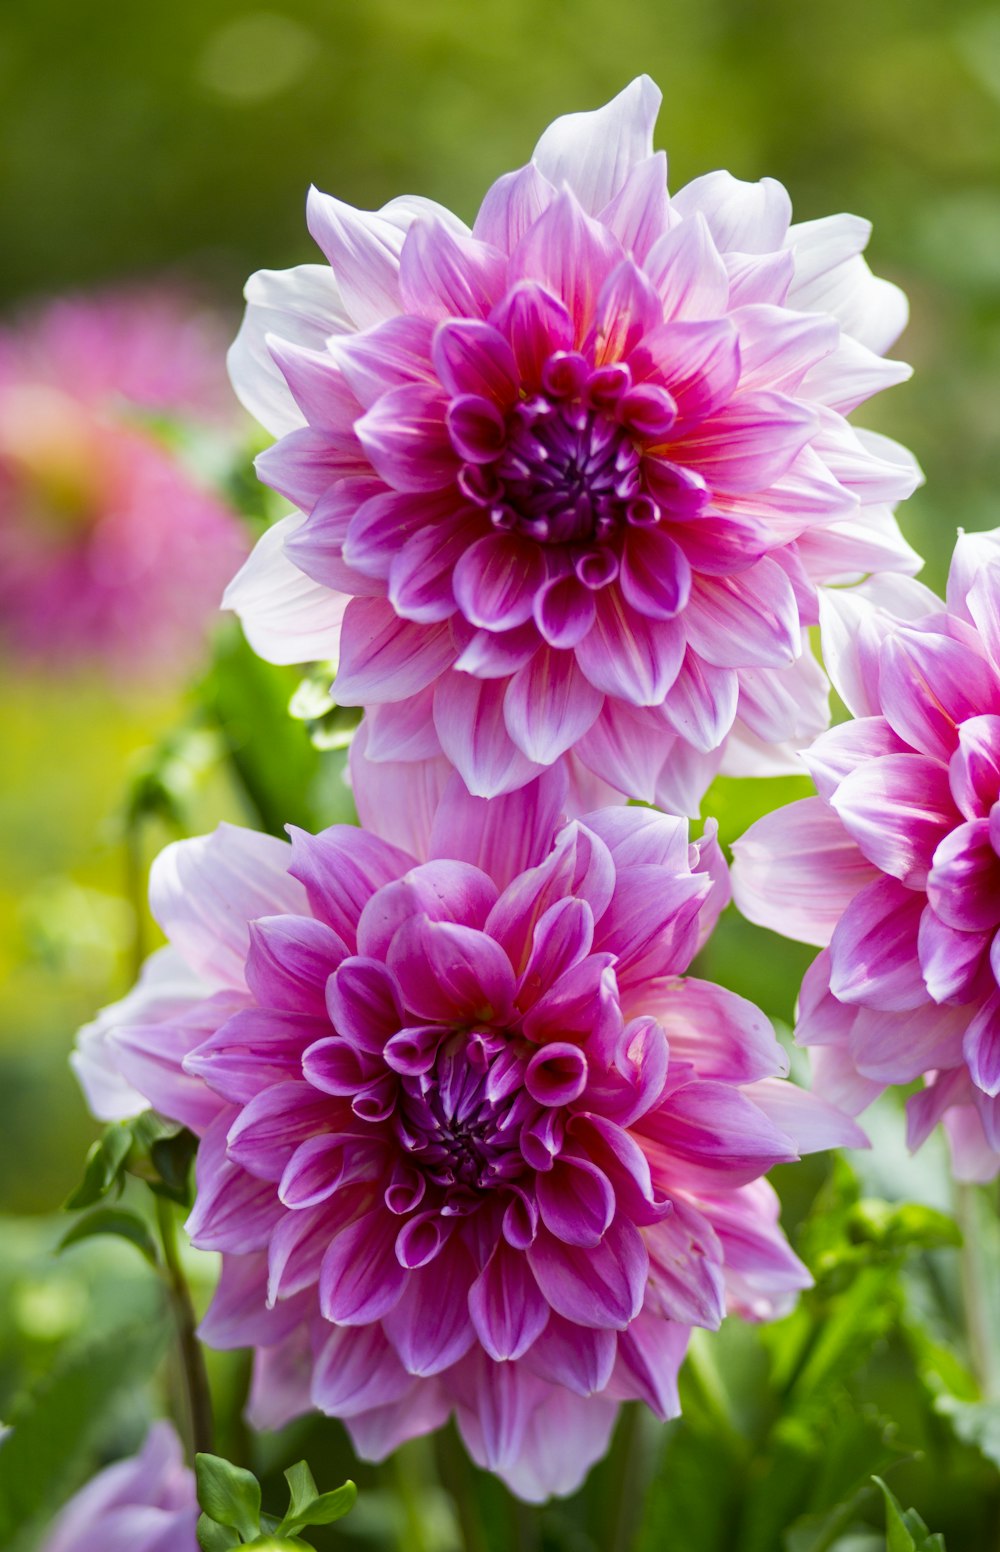 Good Morning Flower Images Free Download | Download Free Pictures ...